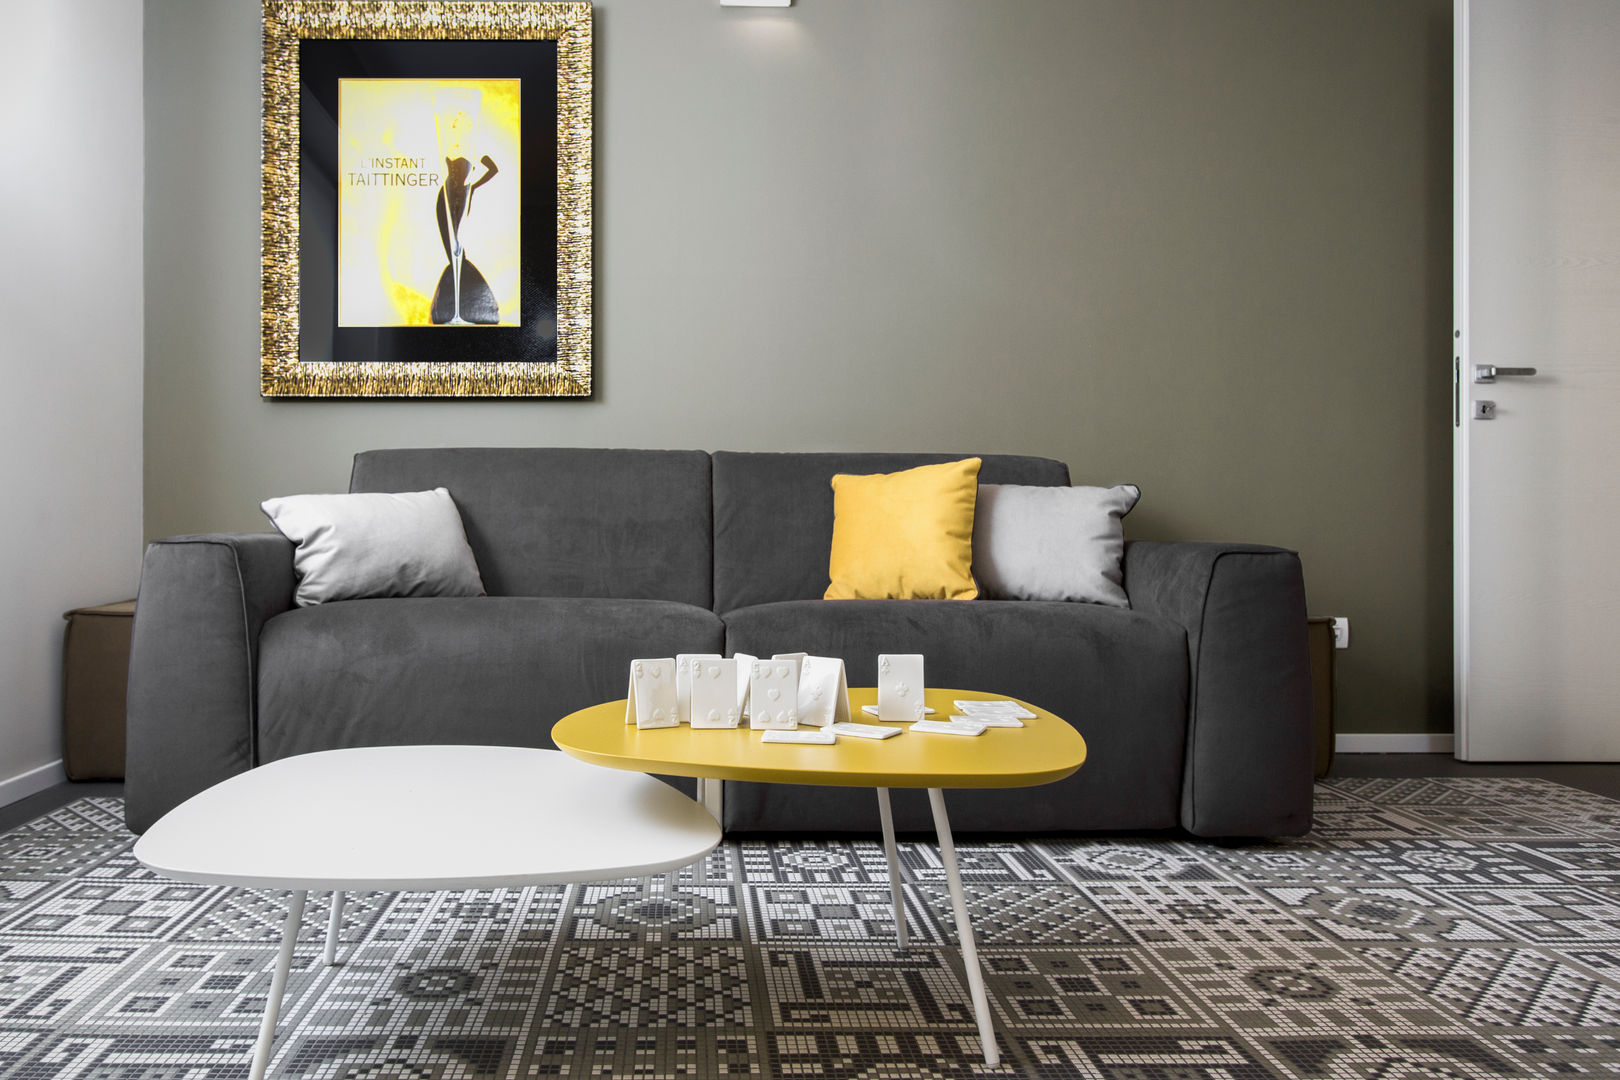 Double "Y" project: it's young and yellow mood, Studio Andrea Castrignano Studio Andrea Castrignano Modern living room